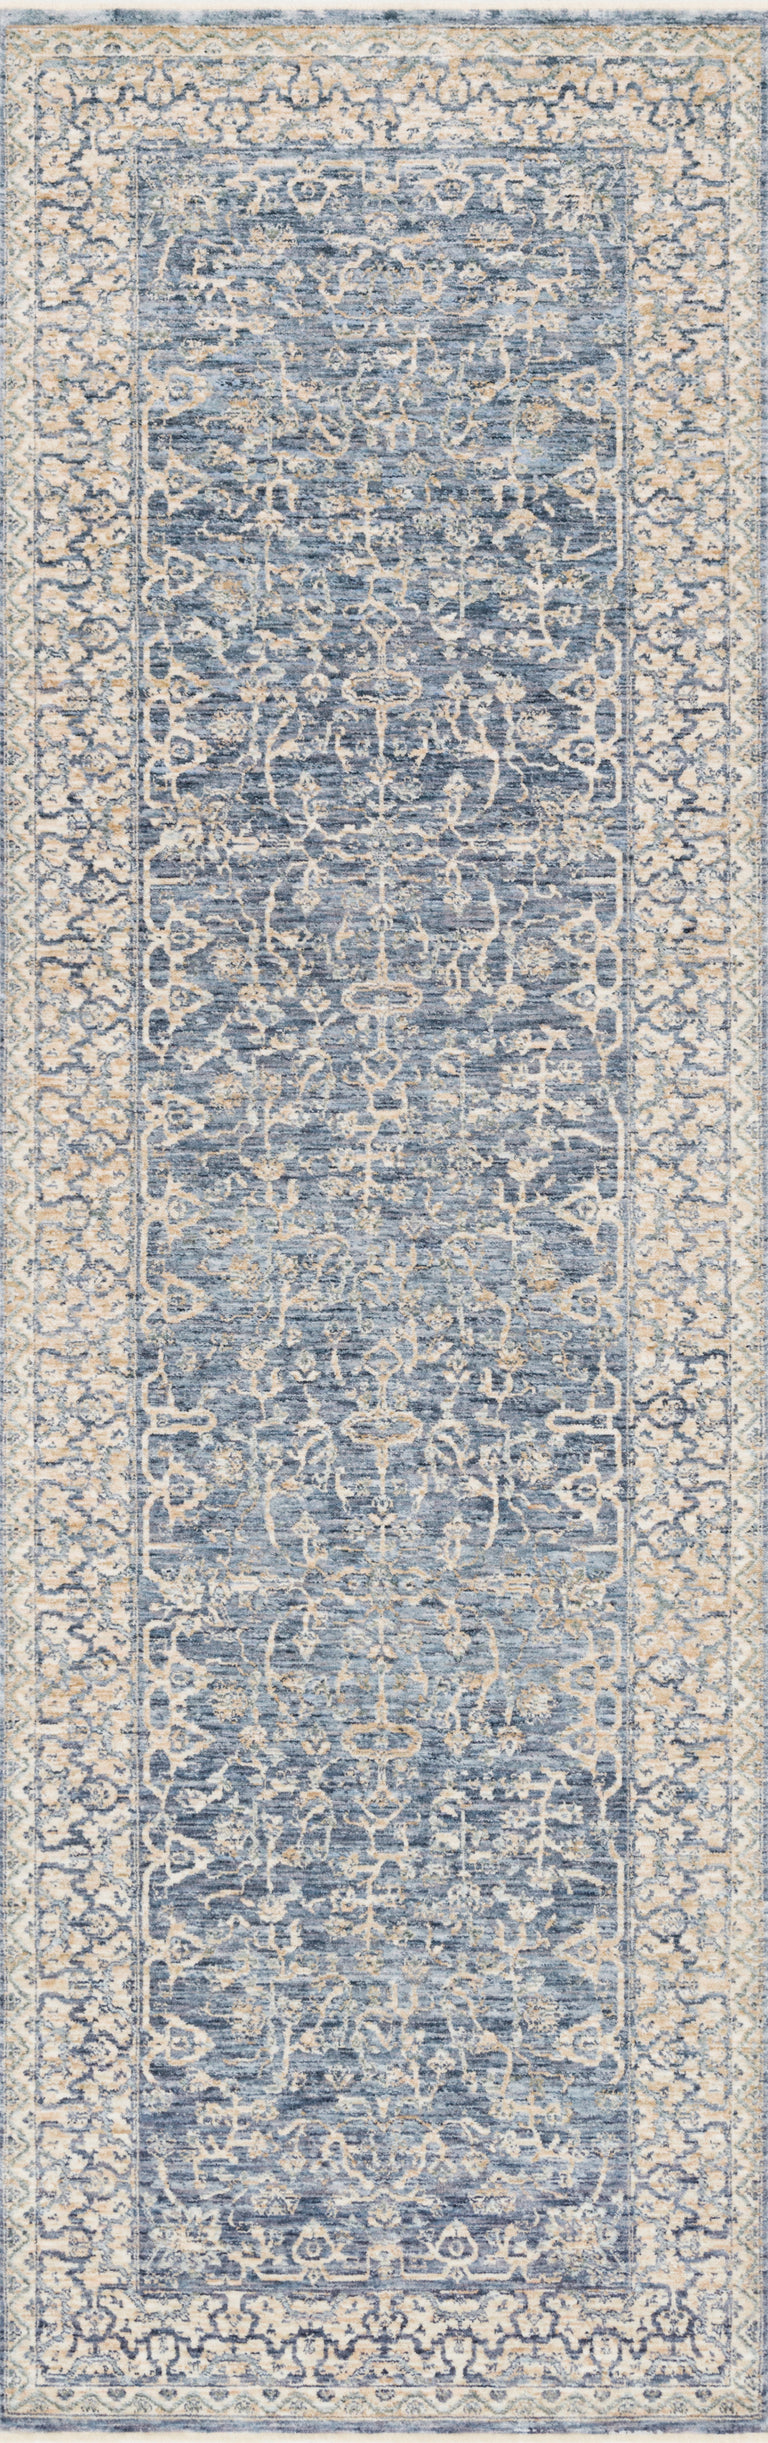 Loloi Rugs Pandora Collection Rug in Dark Blue, Ivory - 9'6" x 12'5"